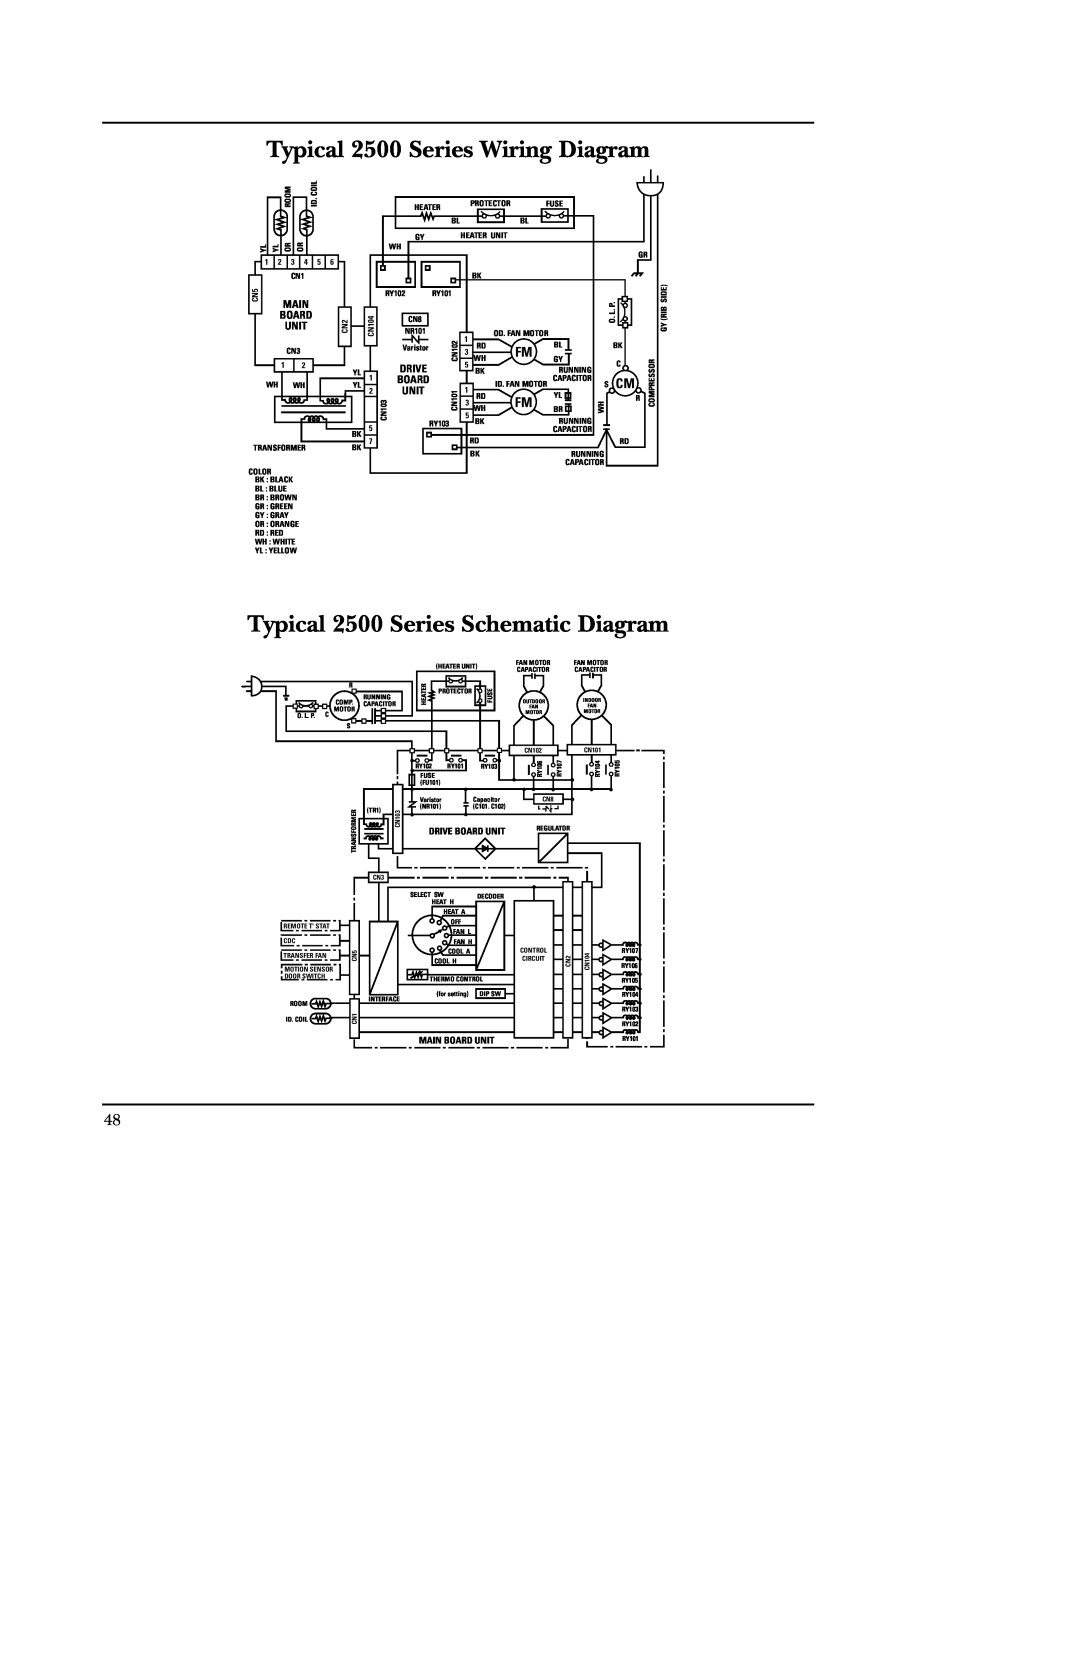 GE 5500 manual Typical 2500 Series Wiring Diagram, Typical 2500 Series Schematic Diagram, Main, Drive Board Unit 